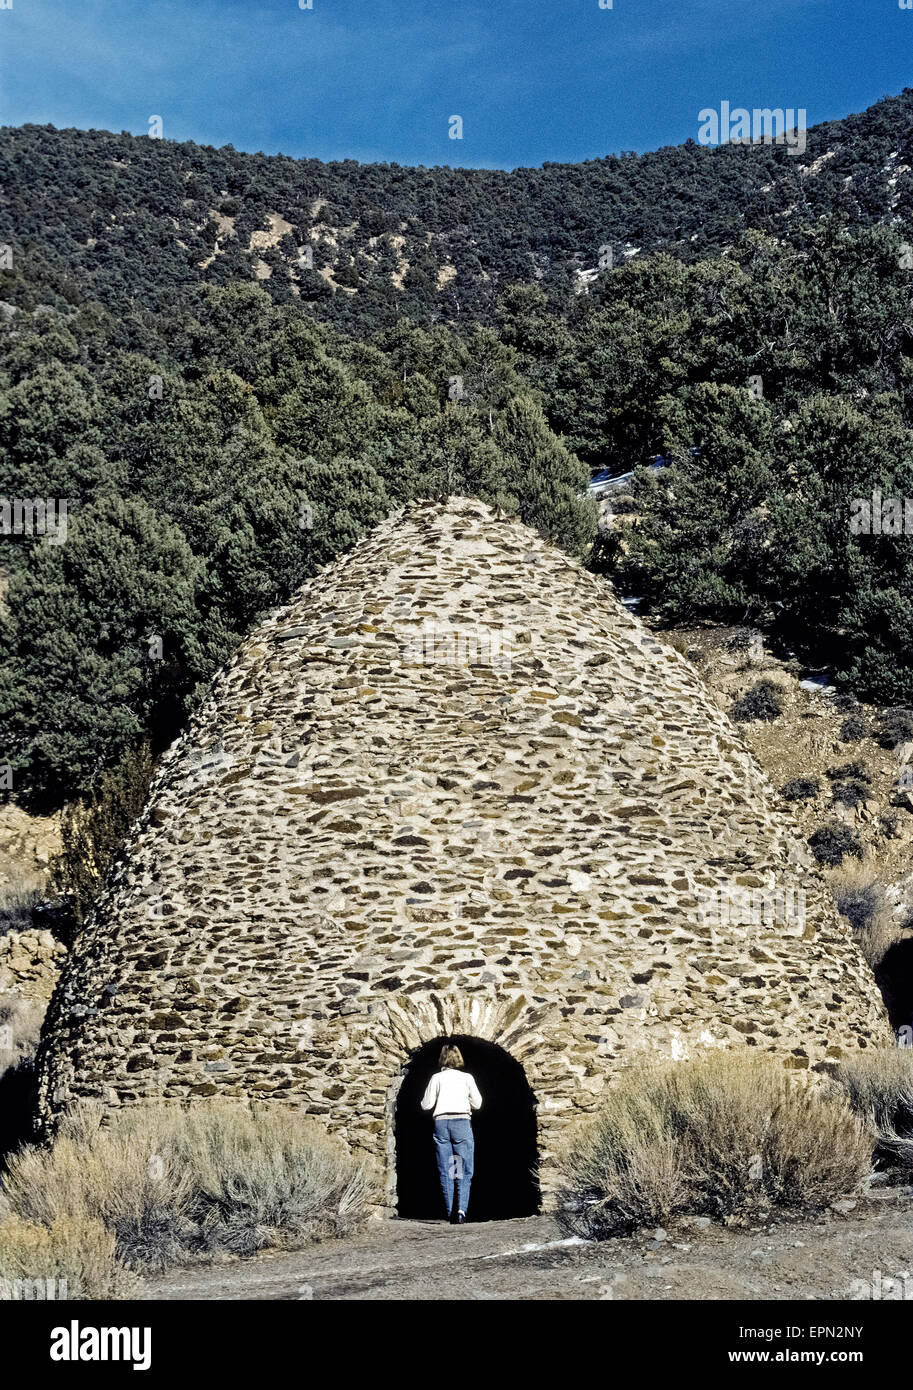 A tourist inspects one of the historic beehive-shaped charcoal kilns built in 1877 to make charcoal for ore smelters used in silver and lead mining operations nearby Death Valley, California, USA. The rock and mortar structures were constructed in Wildrose Canyon in the Panamint Mountains near sources of wood that included pine and juniper trees, which were slowly burned for a week to create the charcoal. The 10 kilns were abandoned when the mines shut down but were restored a century later and have become an attraction in Death Valley National Park. Stock Photo